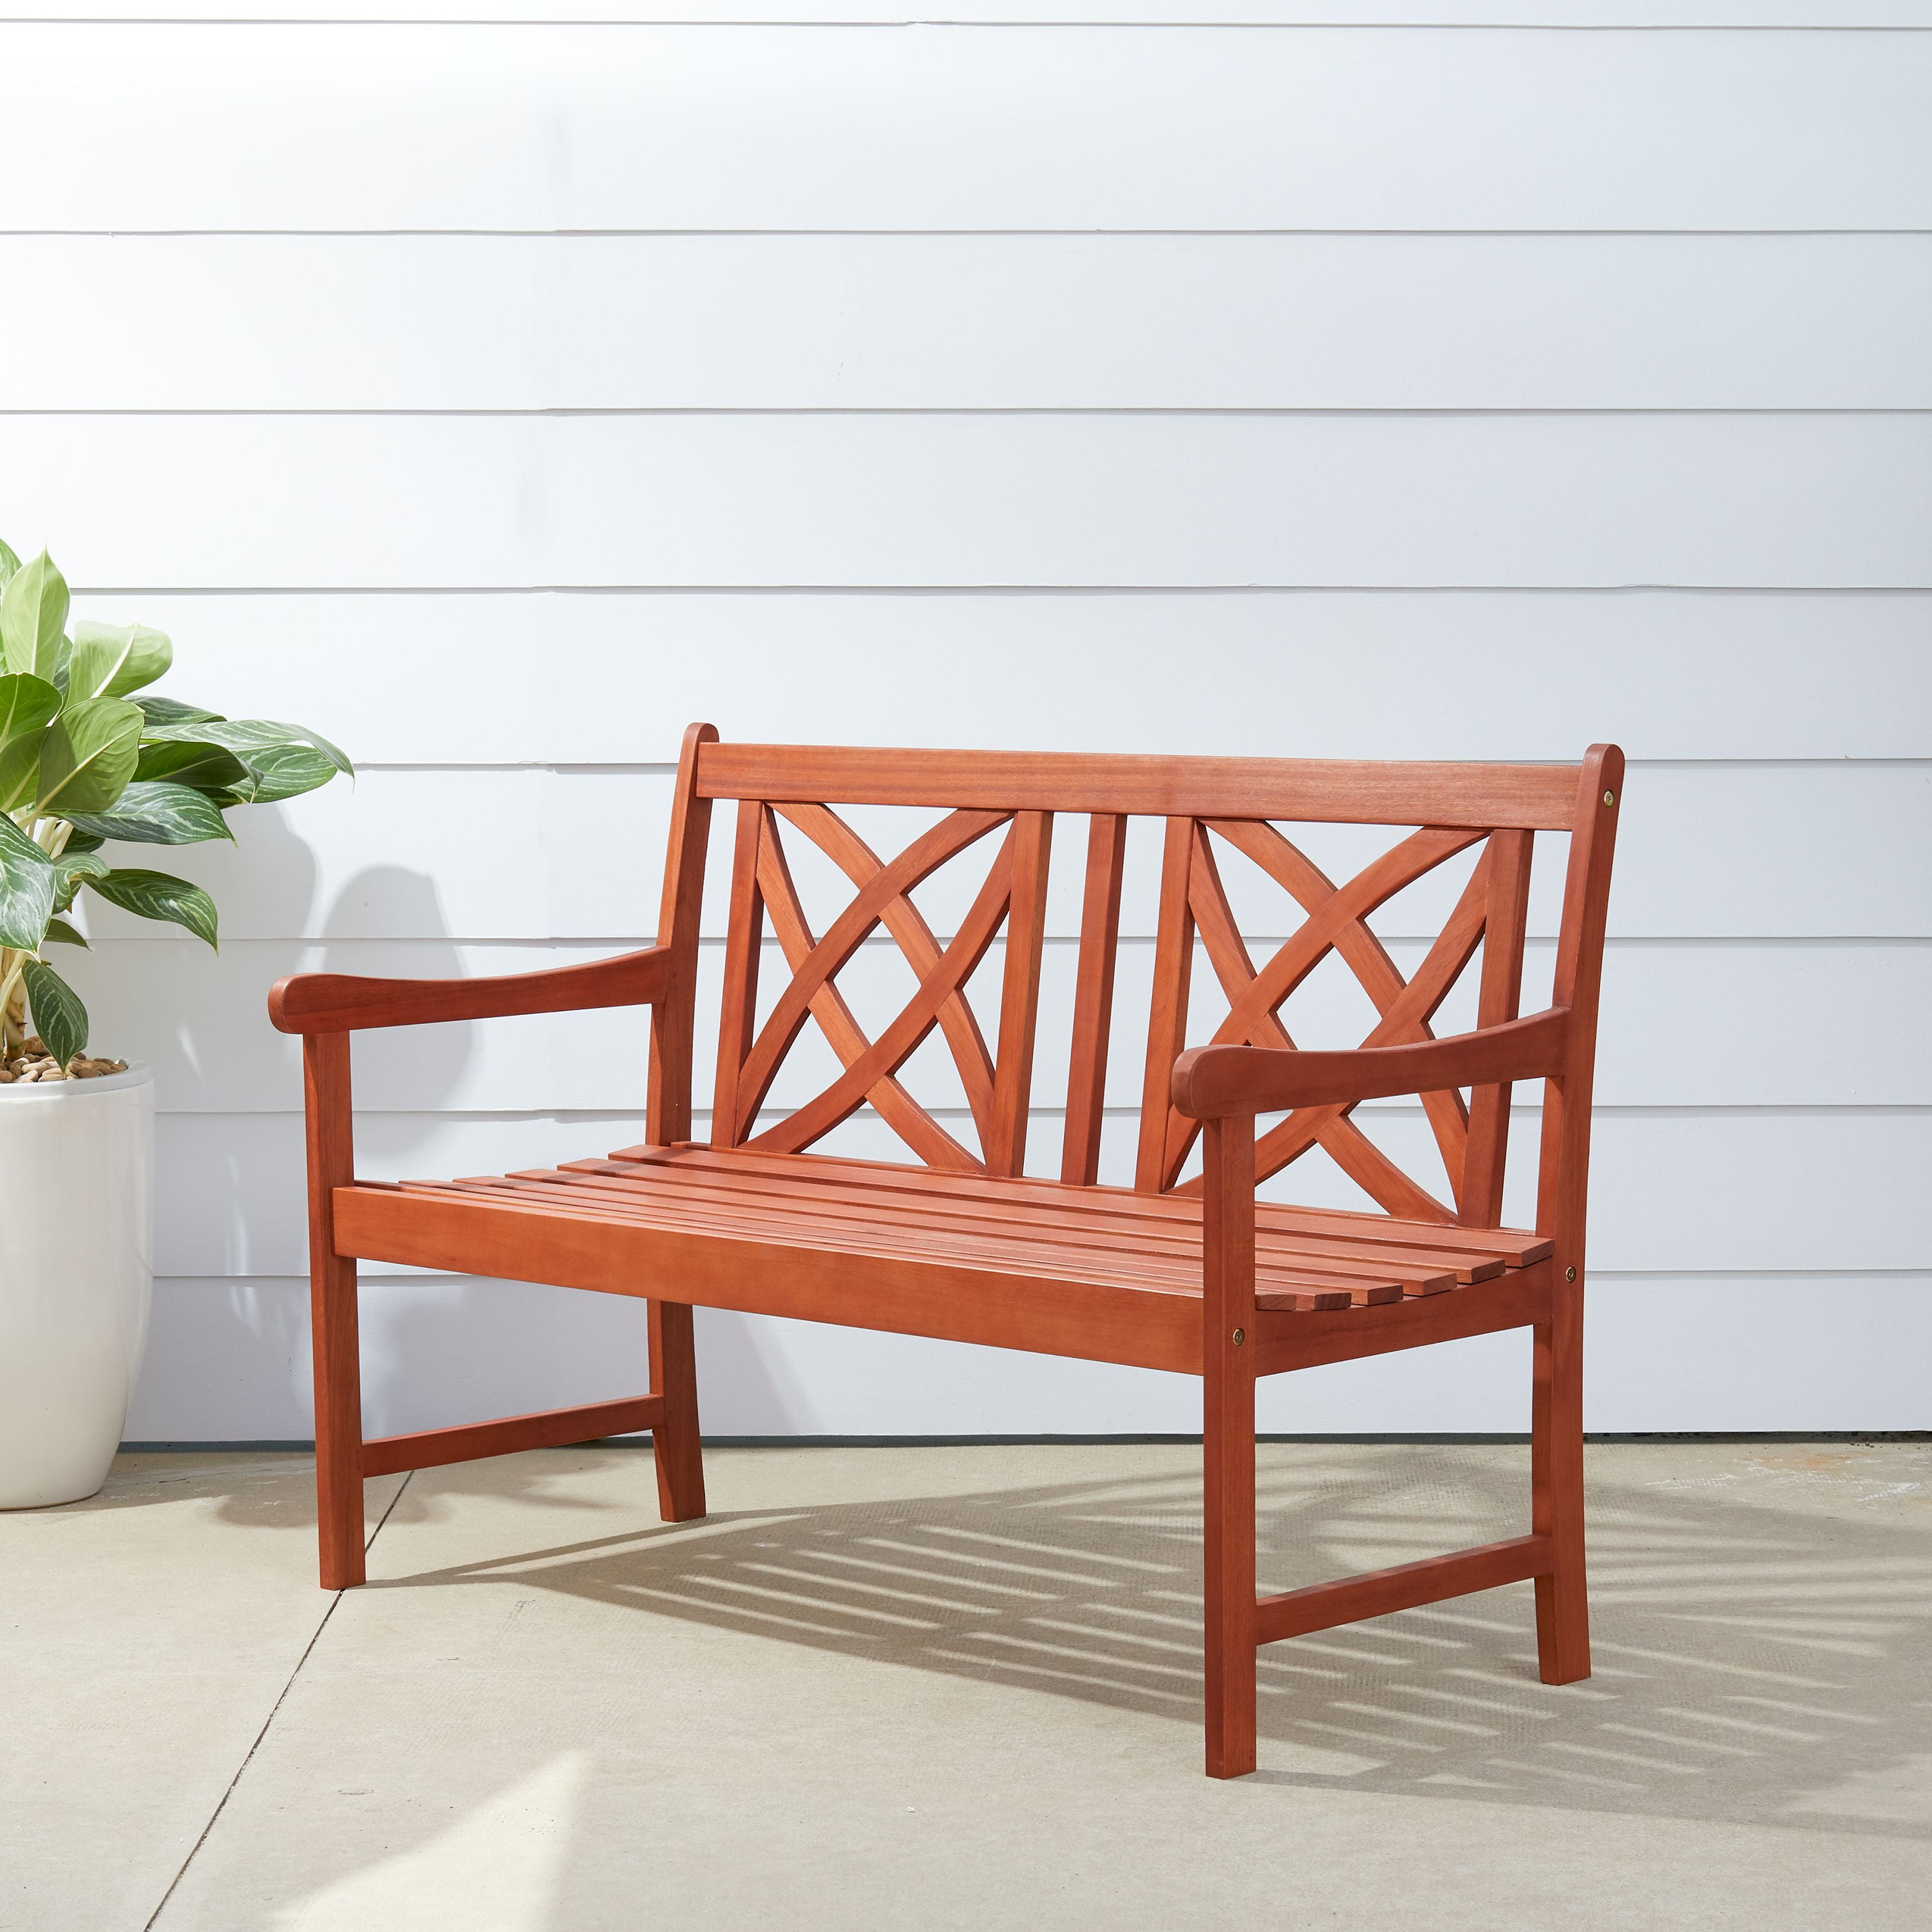 Details about   Patio Solid Wood Bench Folding Loveseat Chair Garden Balcony Outdoor Furniture 